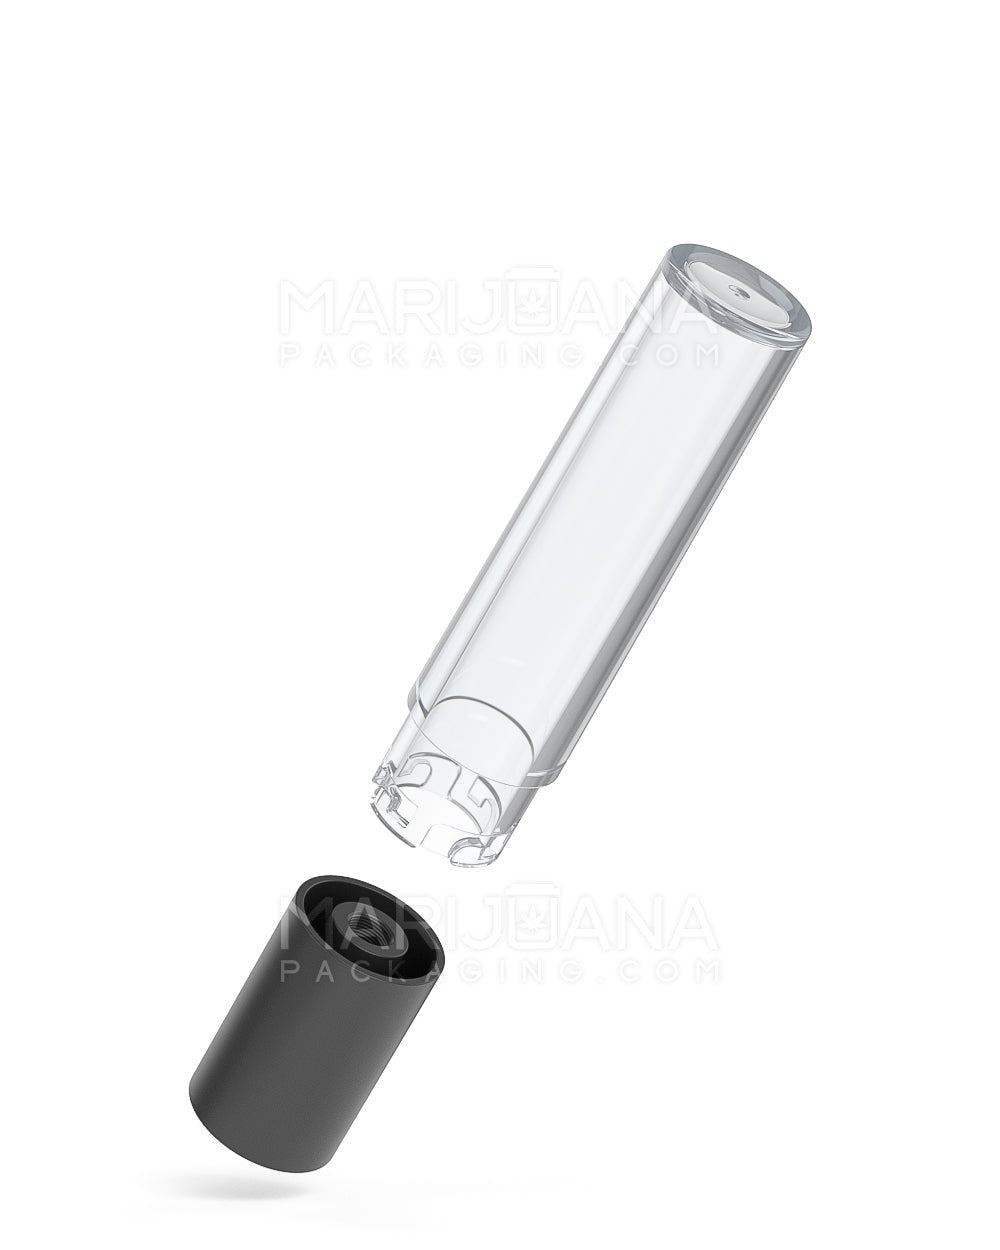 POLLEN GEAR | Five10 Child Resistant Push Down & Turn Wide Short Universal Plastic Caps for Vape Tube | 120mm - Clear - 700 Count - 6